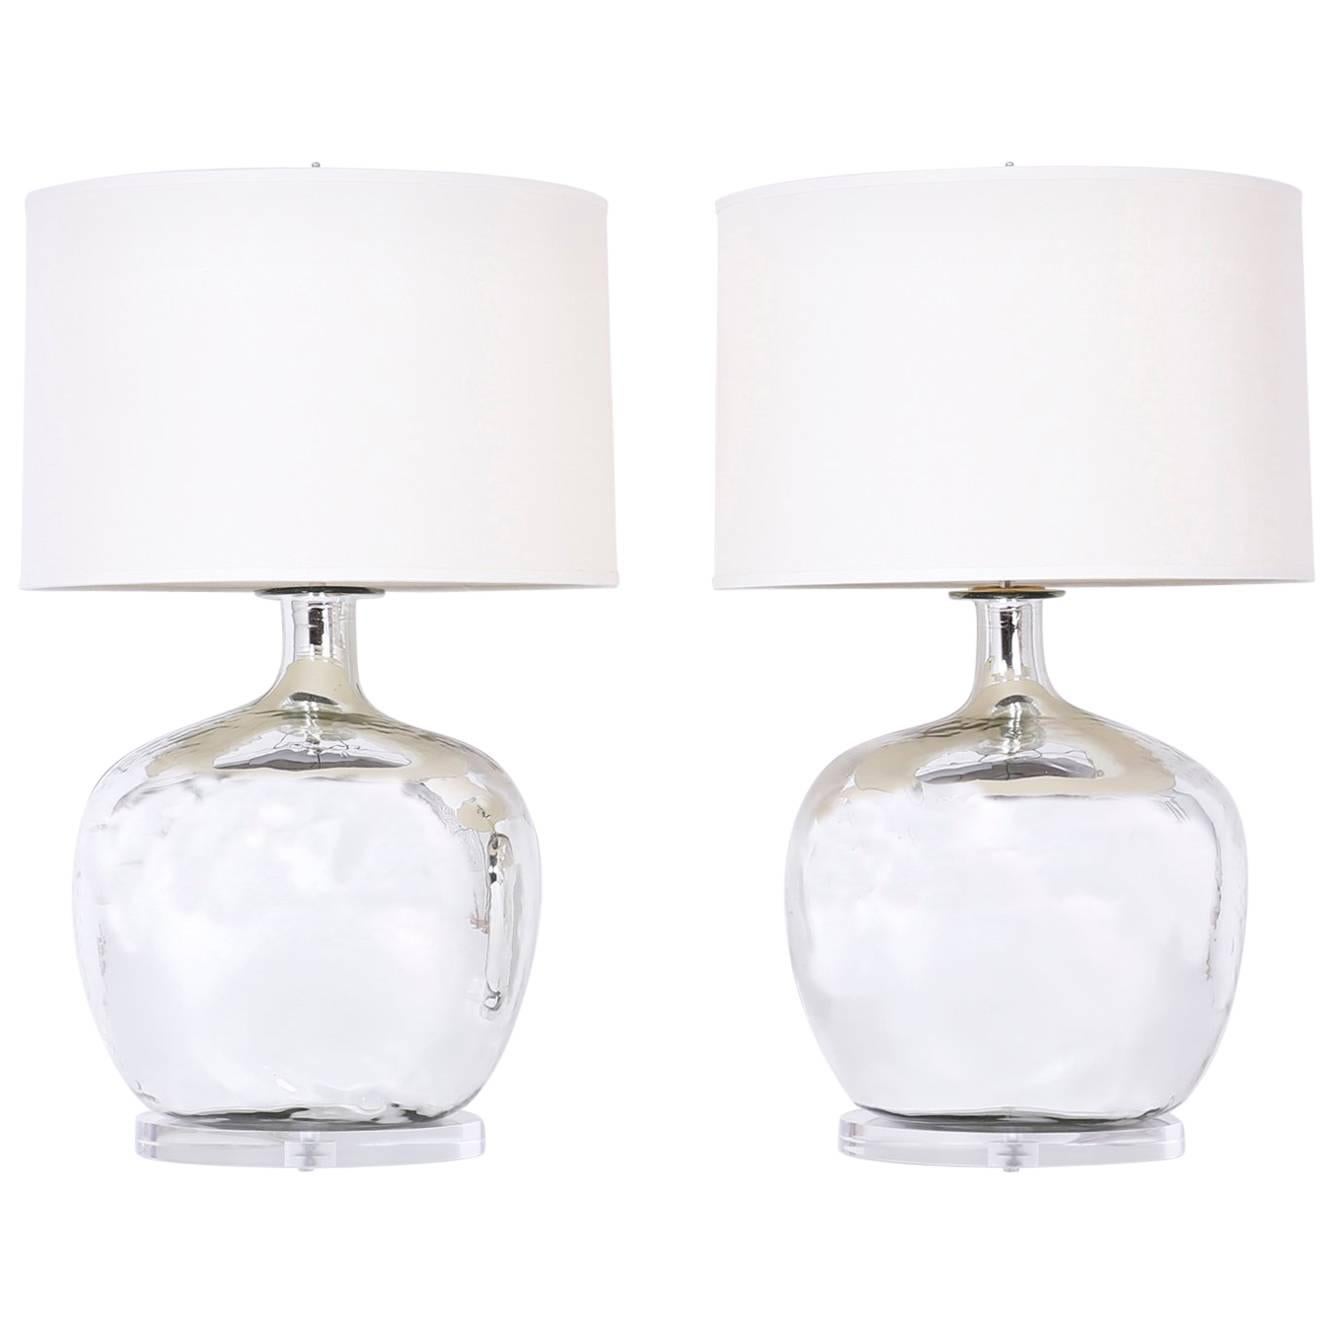 Pair of Silver or Mercury Glass Table Lamps